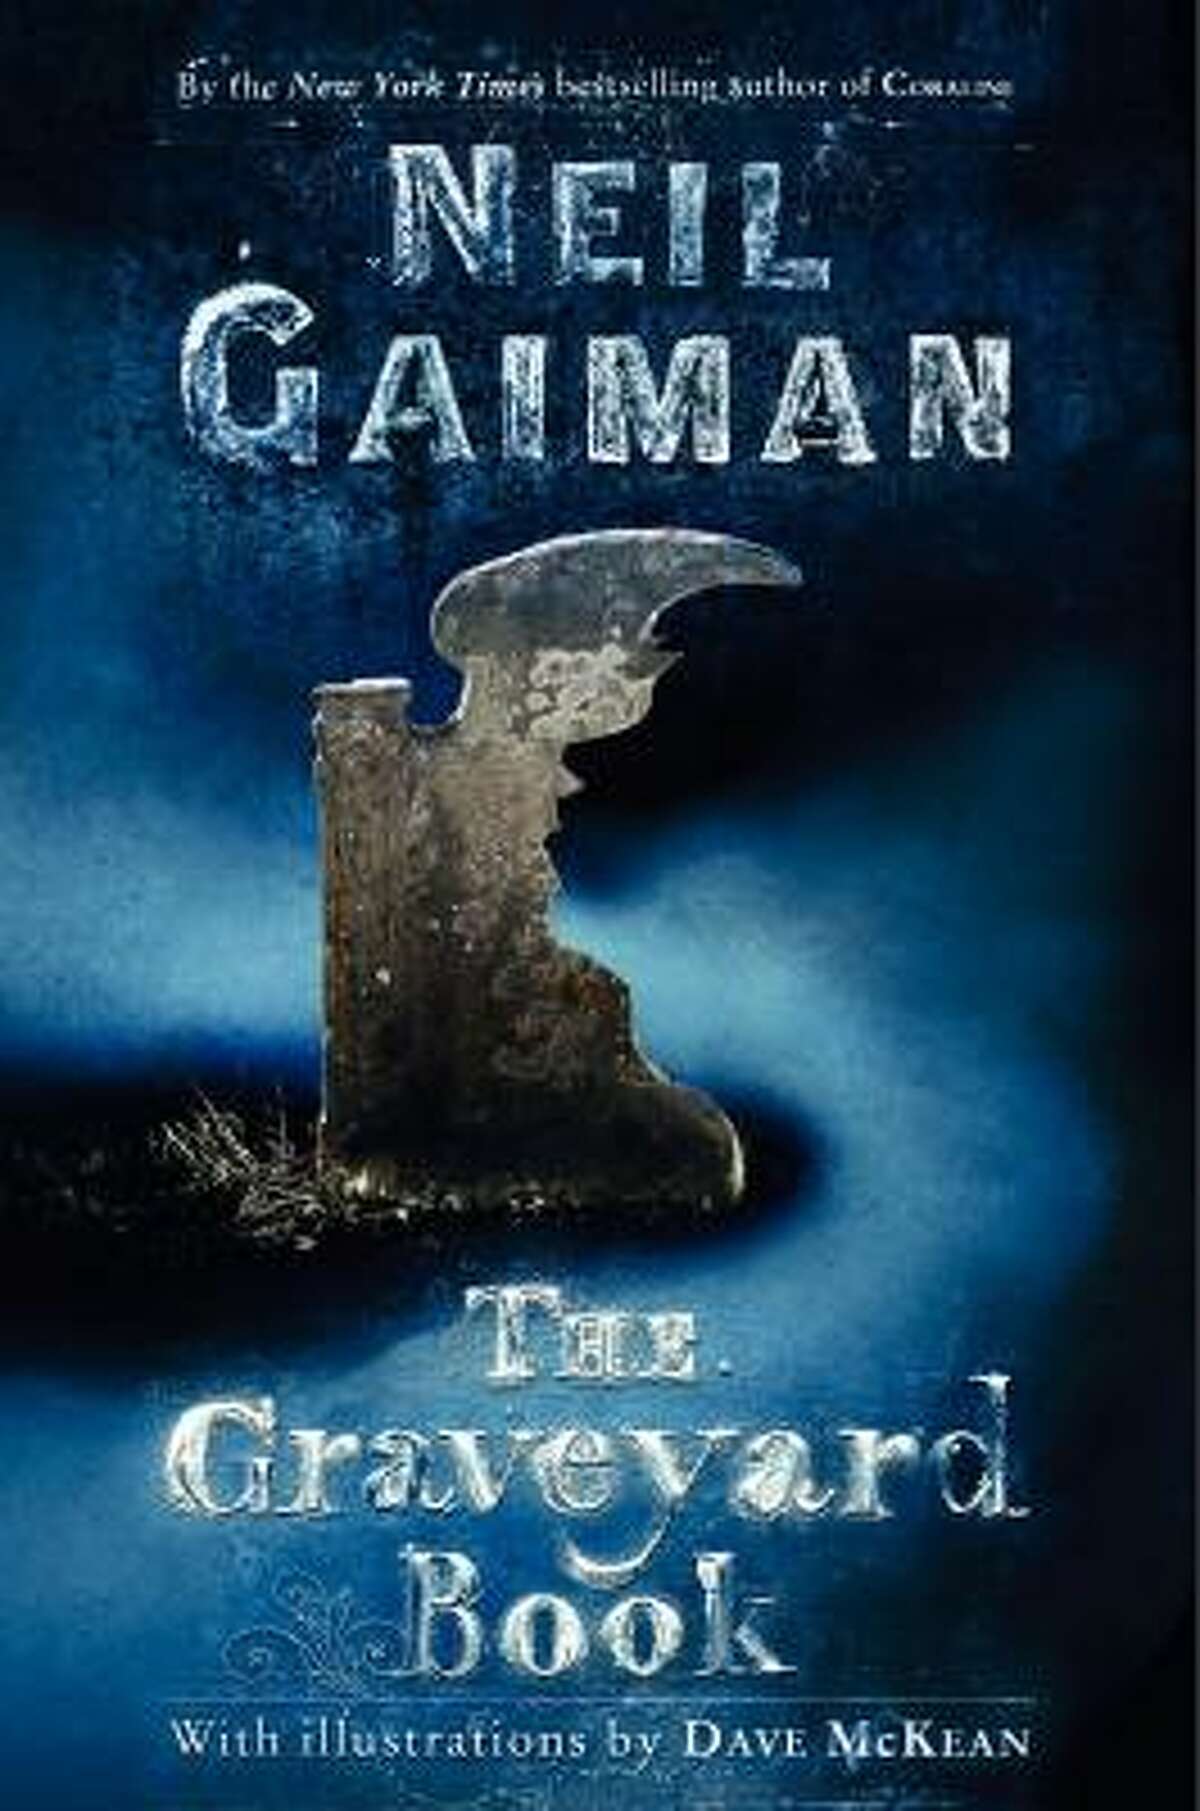 The Graveyard Book by Neil Gaiman Winner 2009 Newbery Medal In The Graveyard Book, Neil Gaiman has created a charming allegory of childhood. Although the book opens with a scary scene--a family is stabbed to death by "a man named Jack” --the story quickly moves into more child-friendly storytelling. The sole survivor of the attack--an 18-month-old baby--escapes his crib and his house, and toddles to a nearby graveyard. Quickly recognizing that the baby is orphaned, the graveyard's ghostly residents adopt him, name him Nobody ("Bod"), and allow him to live in their tomb. Taking inspiration from Kipling’s The Jungle Book, Gaiman describes how the toddler navigates among the headstones, asking a lot of questions and picking up the tricks of the living and the dead. In serial-like episodes, the story follows Bod's progress as he grows from baby to teen, learning life’s lessons amid a cadre of the long-dead, ghouls, witches, intermittent human interlopers. A pallid, nocturnal guardian named Silas ensures that Bod receives food, books, and anything else he might need from the human world. Whenever the boy strays from his usual play among the headstones, he finds new dangers, learns his limitations and strengths, and acquires the skills he needs to survive within the confines of the graveyard and in wider world beyond. (ages 10 and up) -–Heidi Broadhead, Amazon.com review.